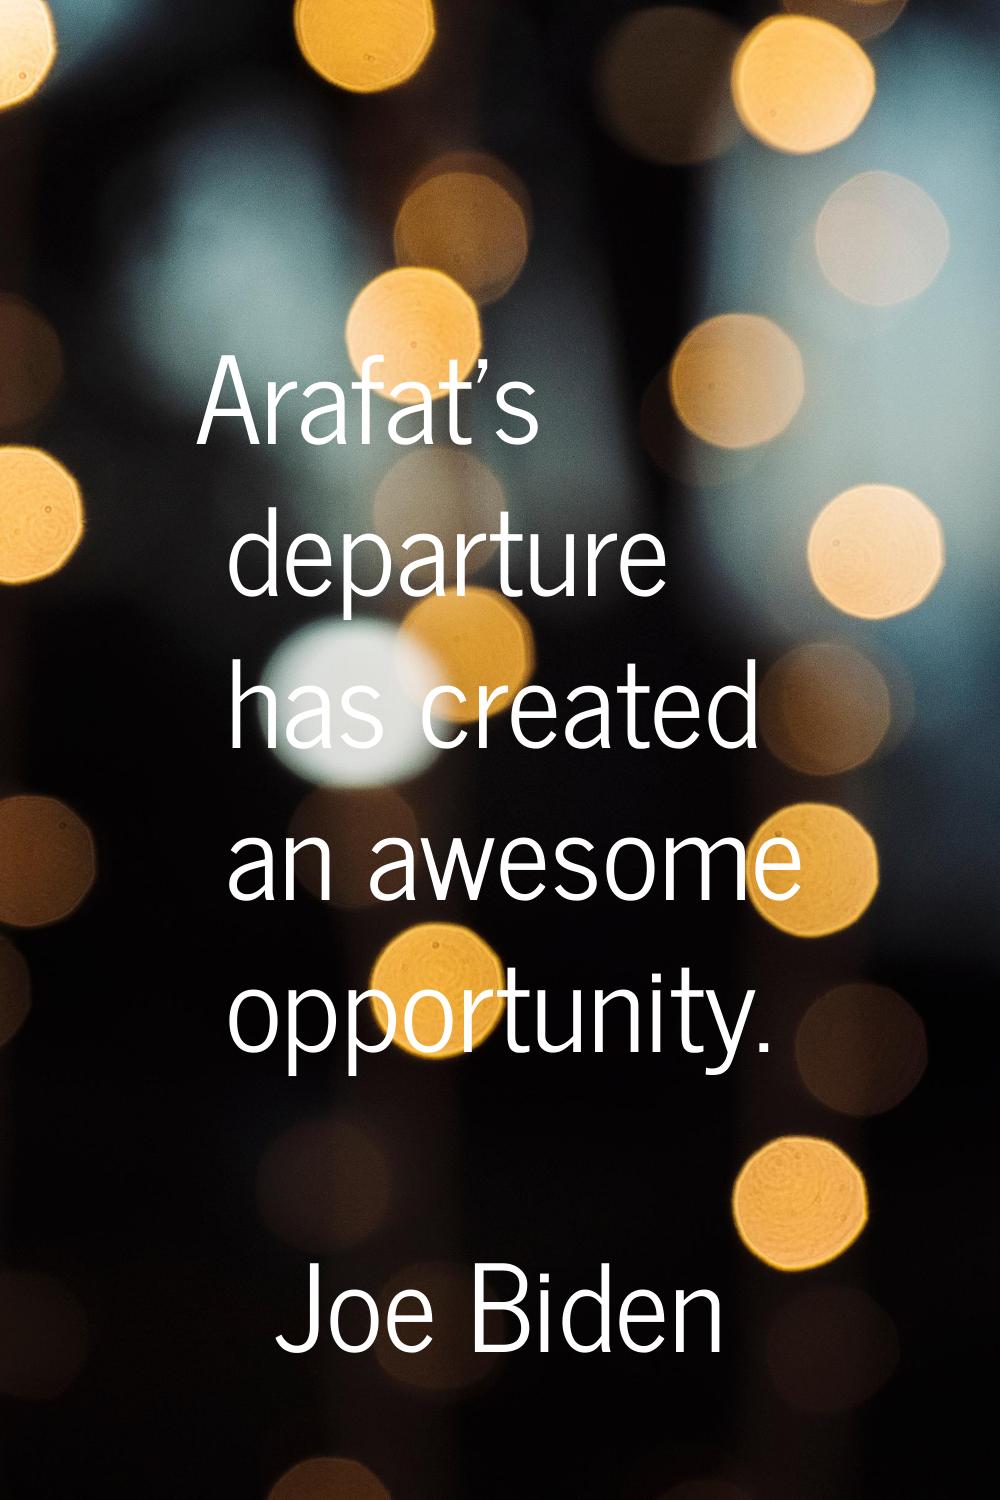 Arafat's departure has created an awesome opportunity.